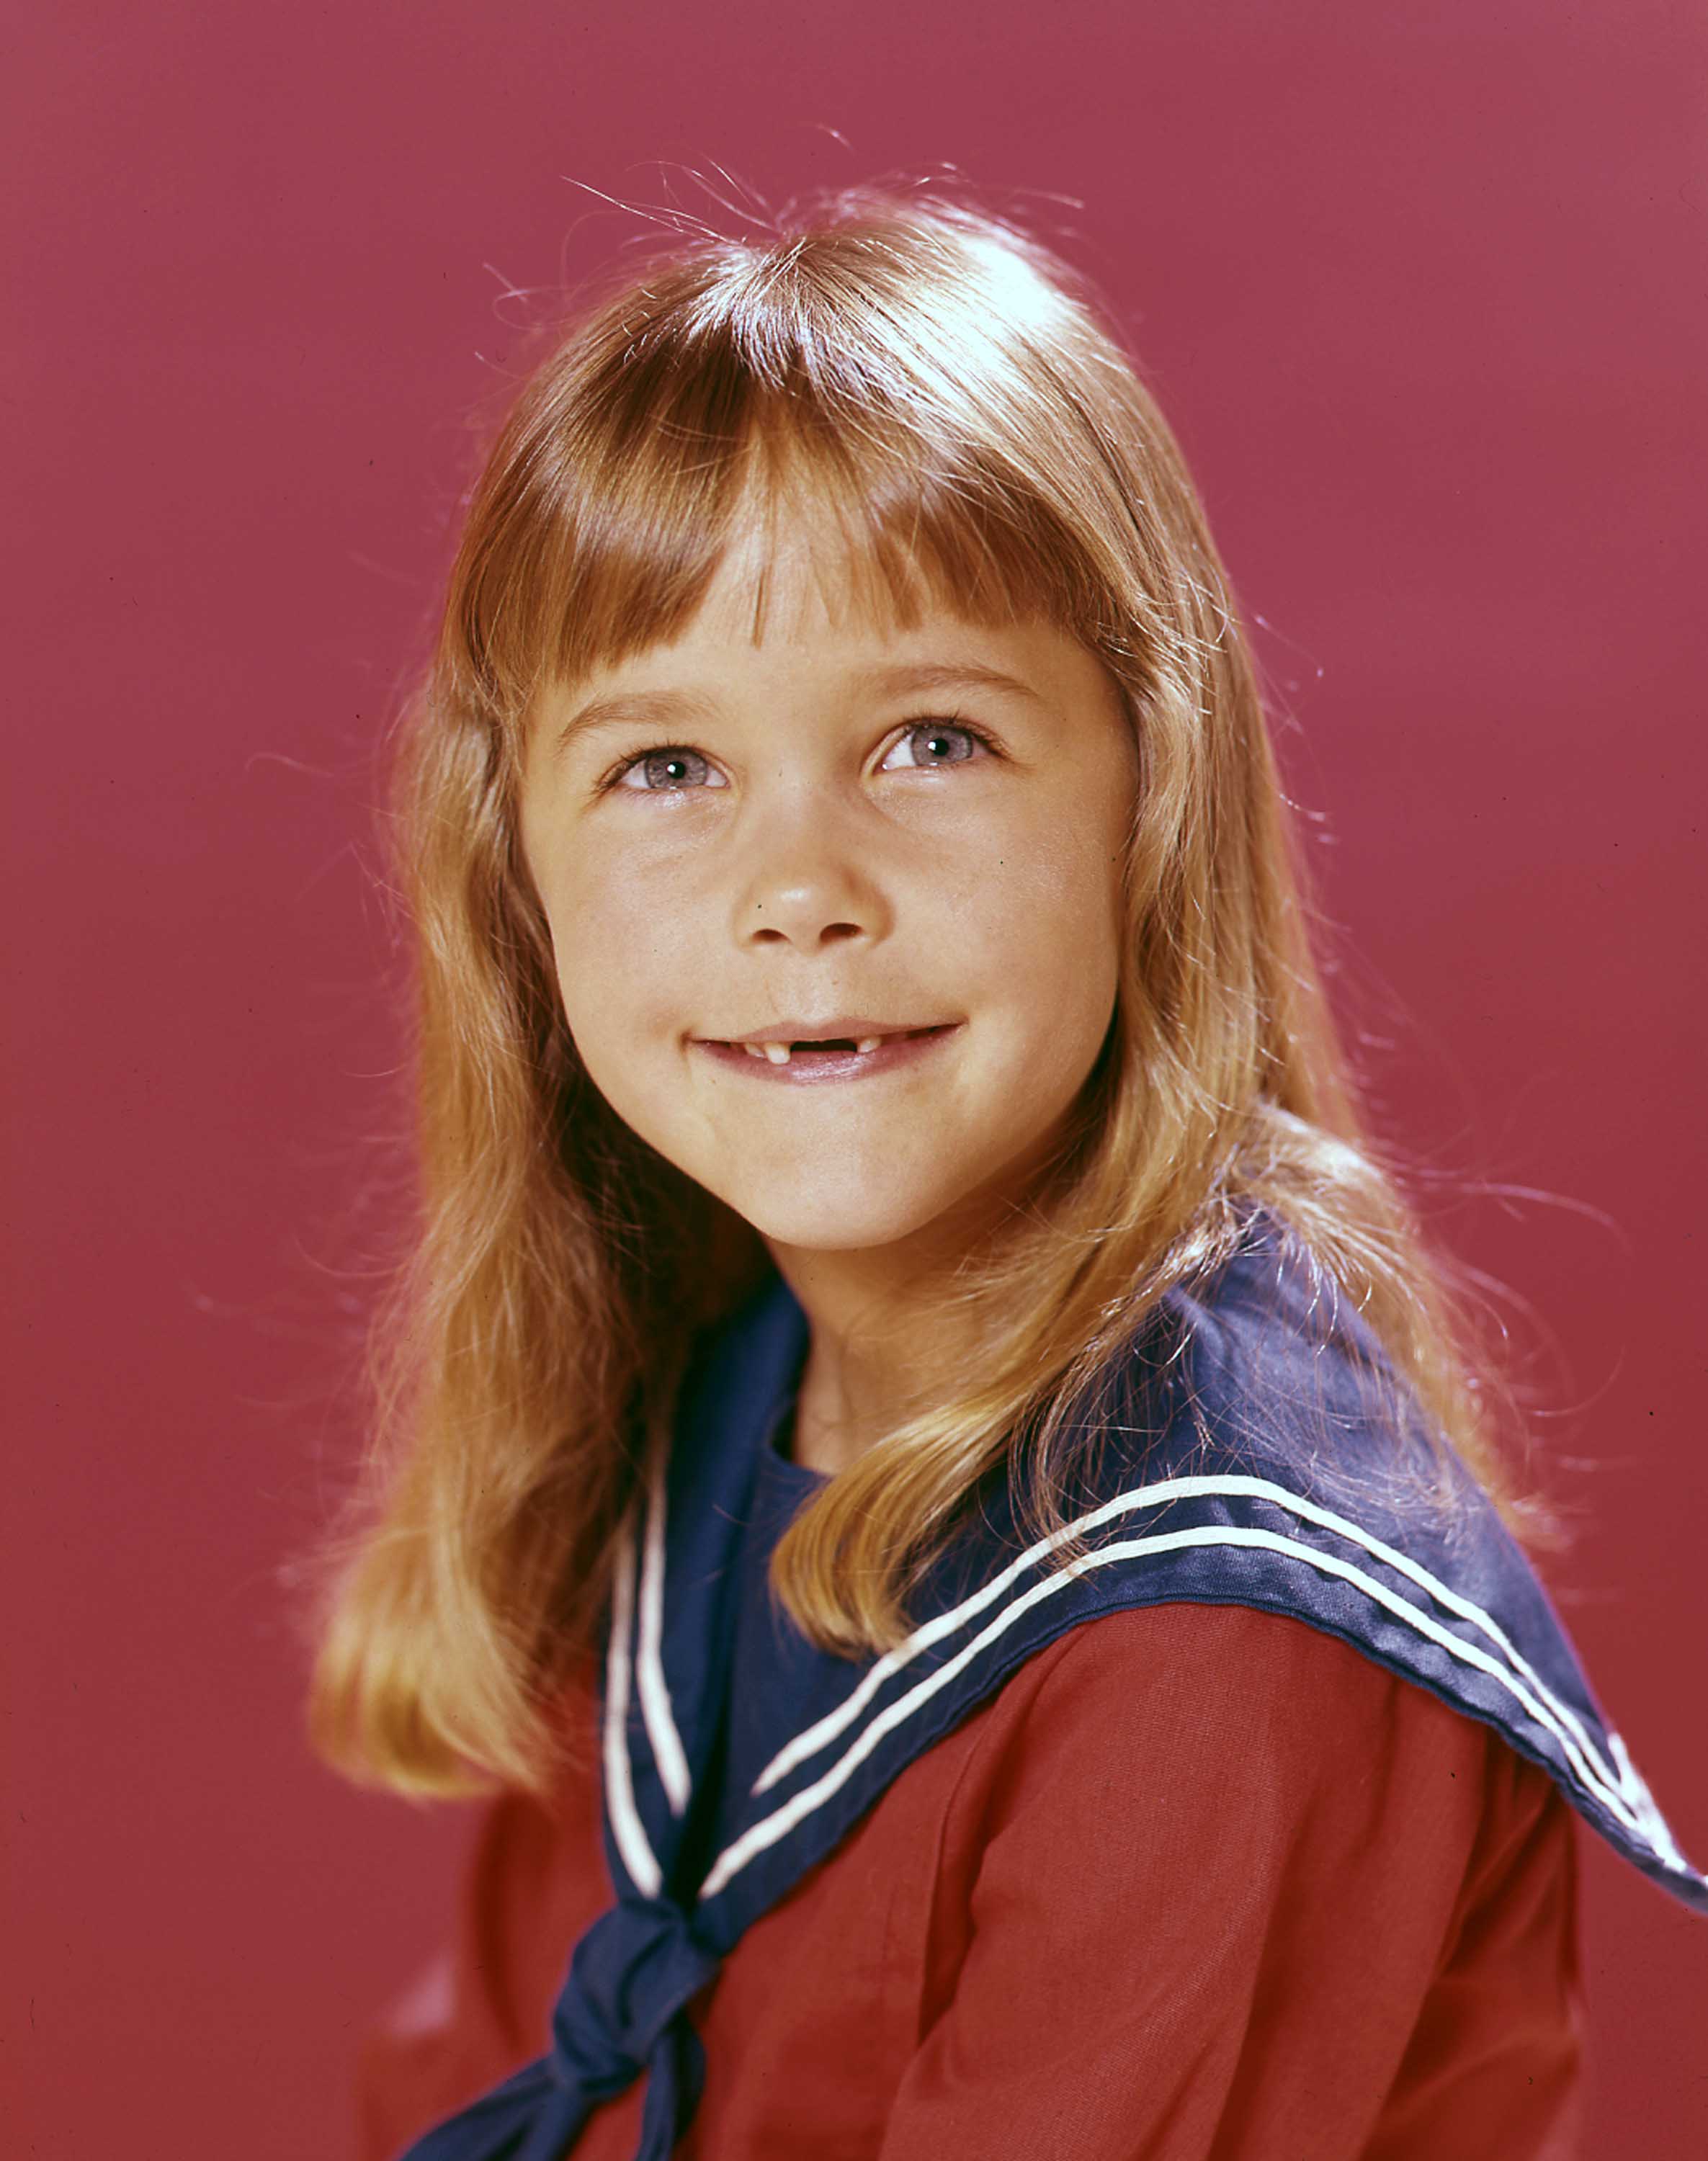 Promotional photo of Erin Murphy for "Bewitched" in June 1971 | Photo: Getty Images